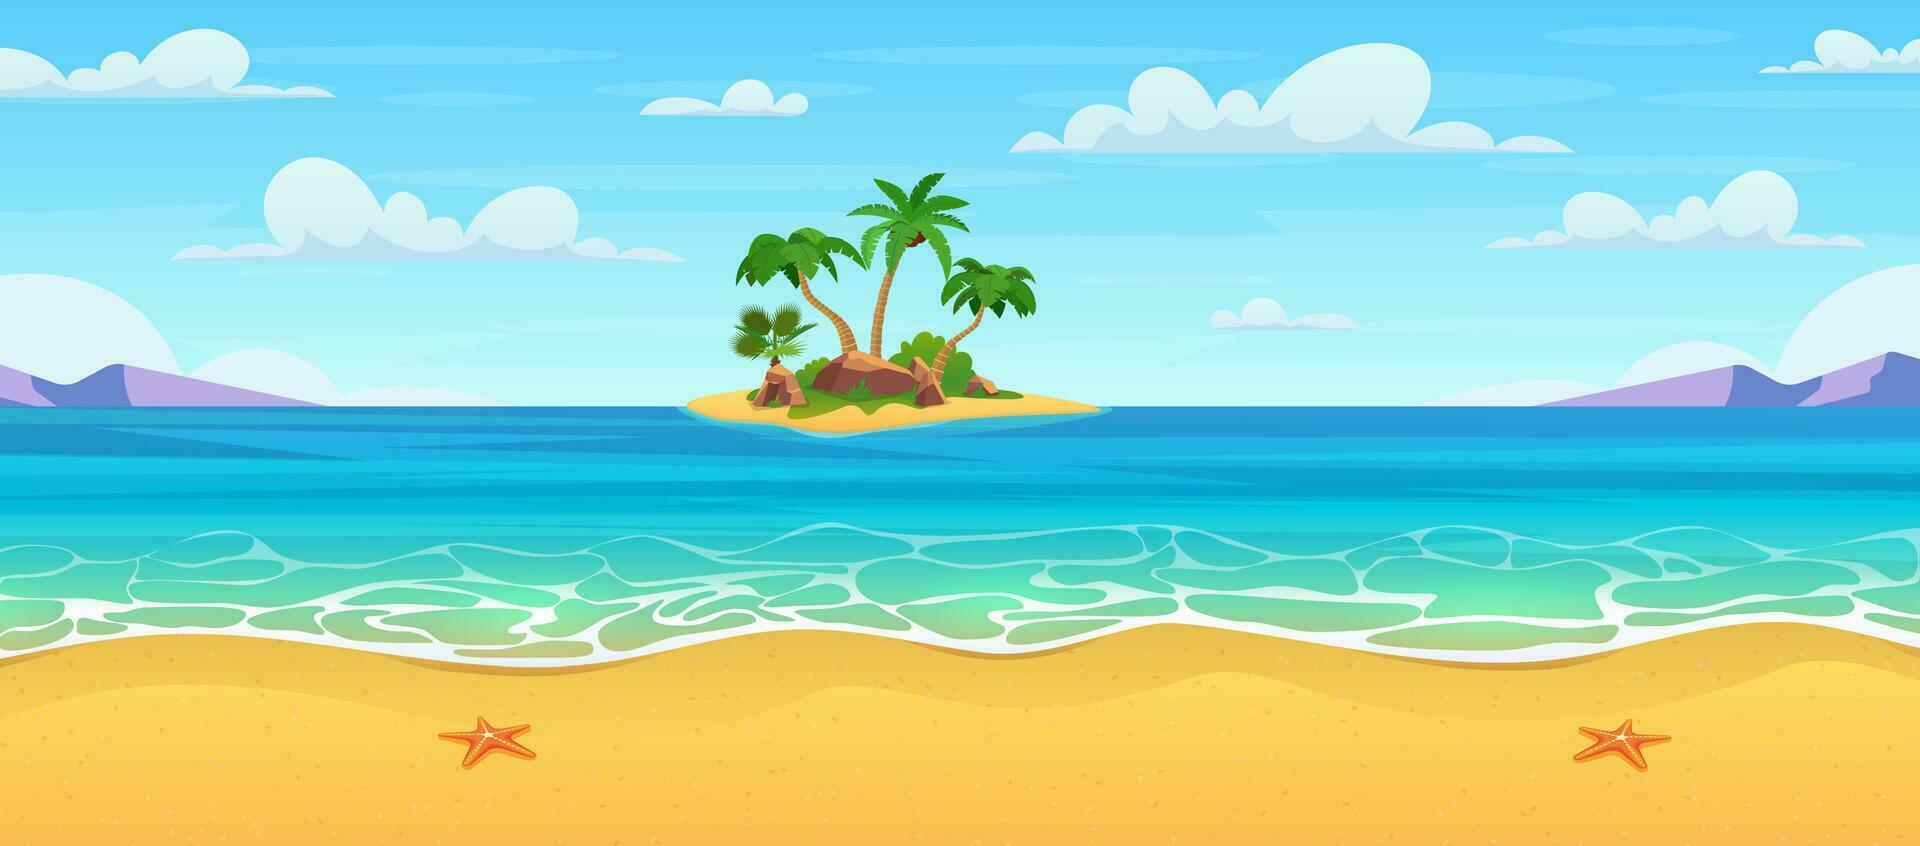 Cartoon summer beach. Tropical island in ocean with palm trees and rock. summer sea landscape. Tropical landscape. Vector illustration in flat style